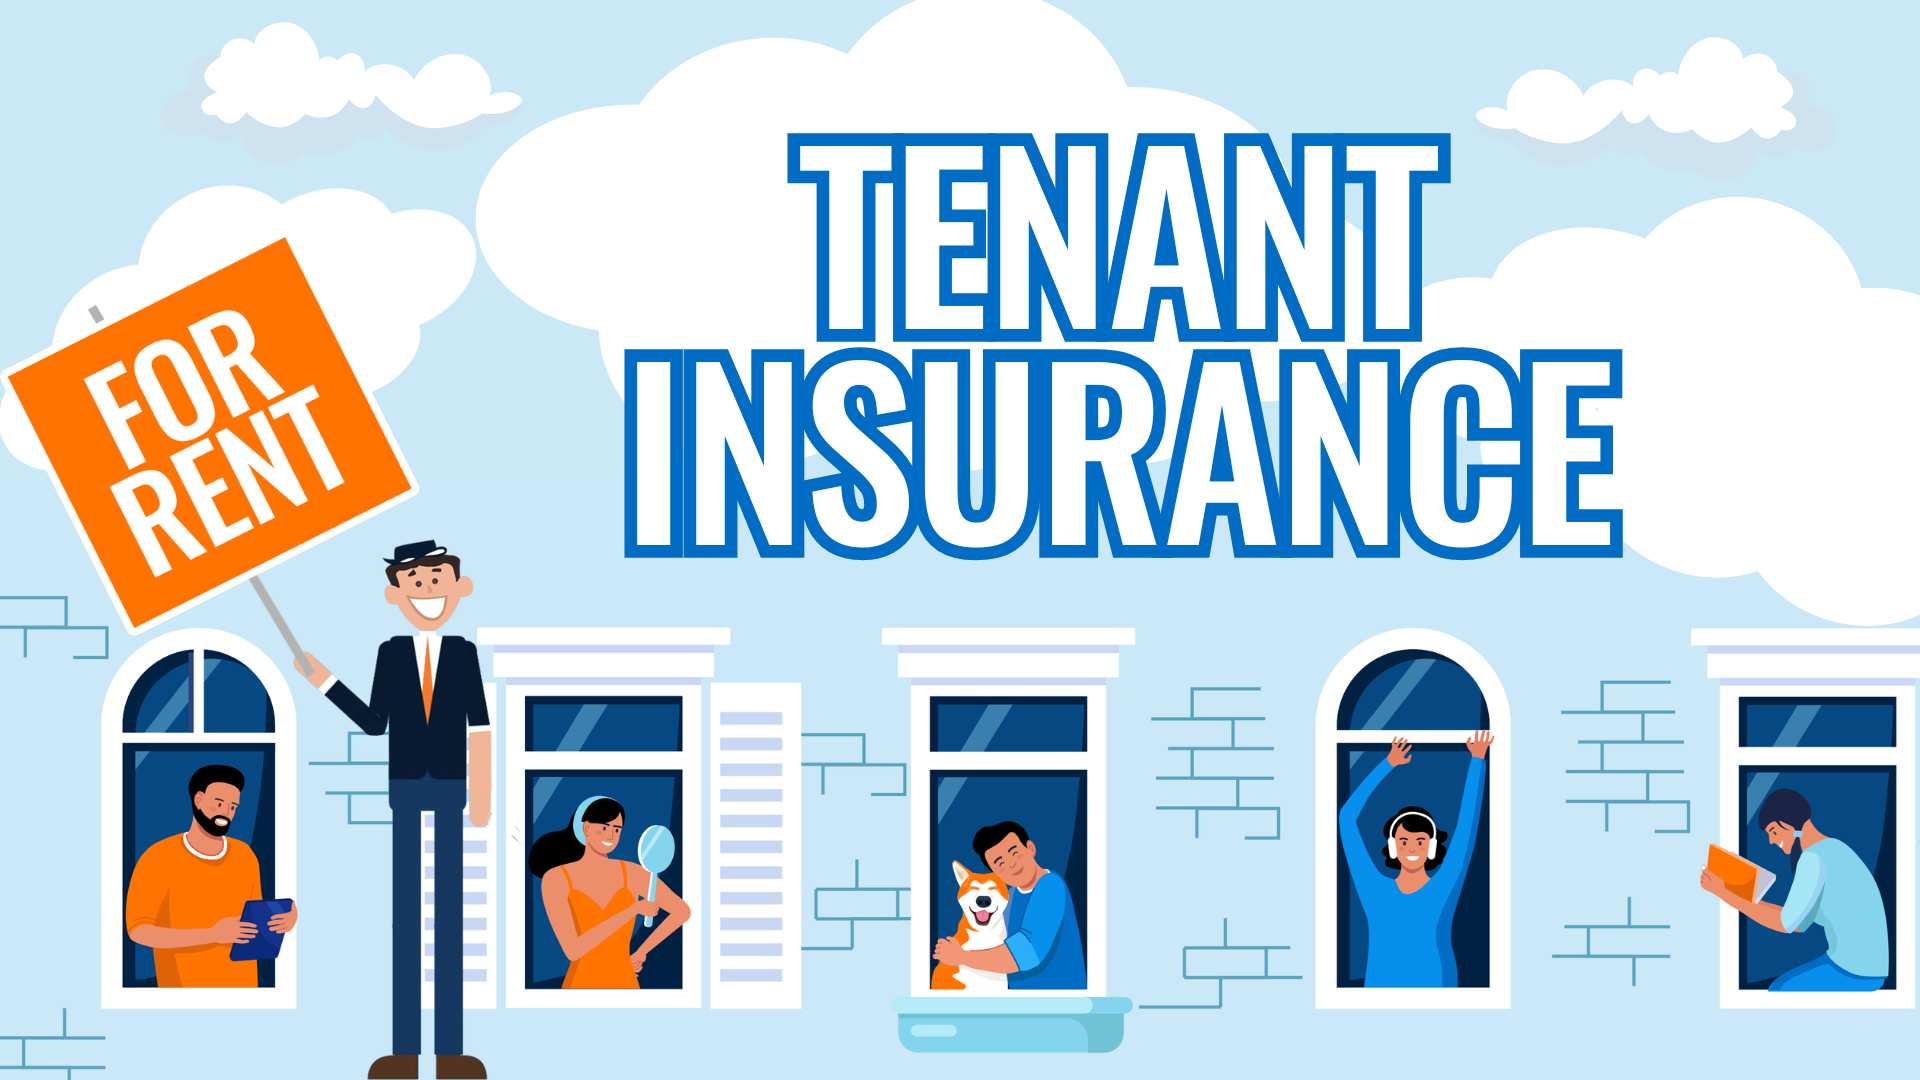 Tenant Insurance - Get a Free Quote Now!